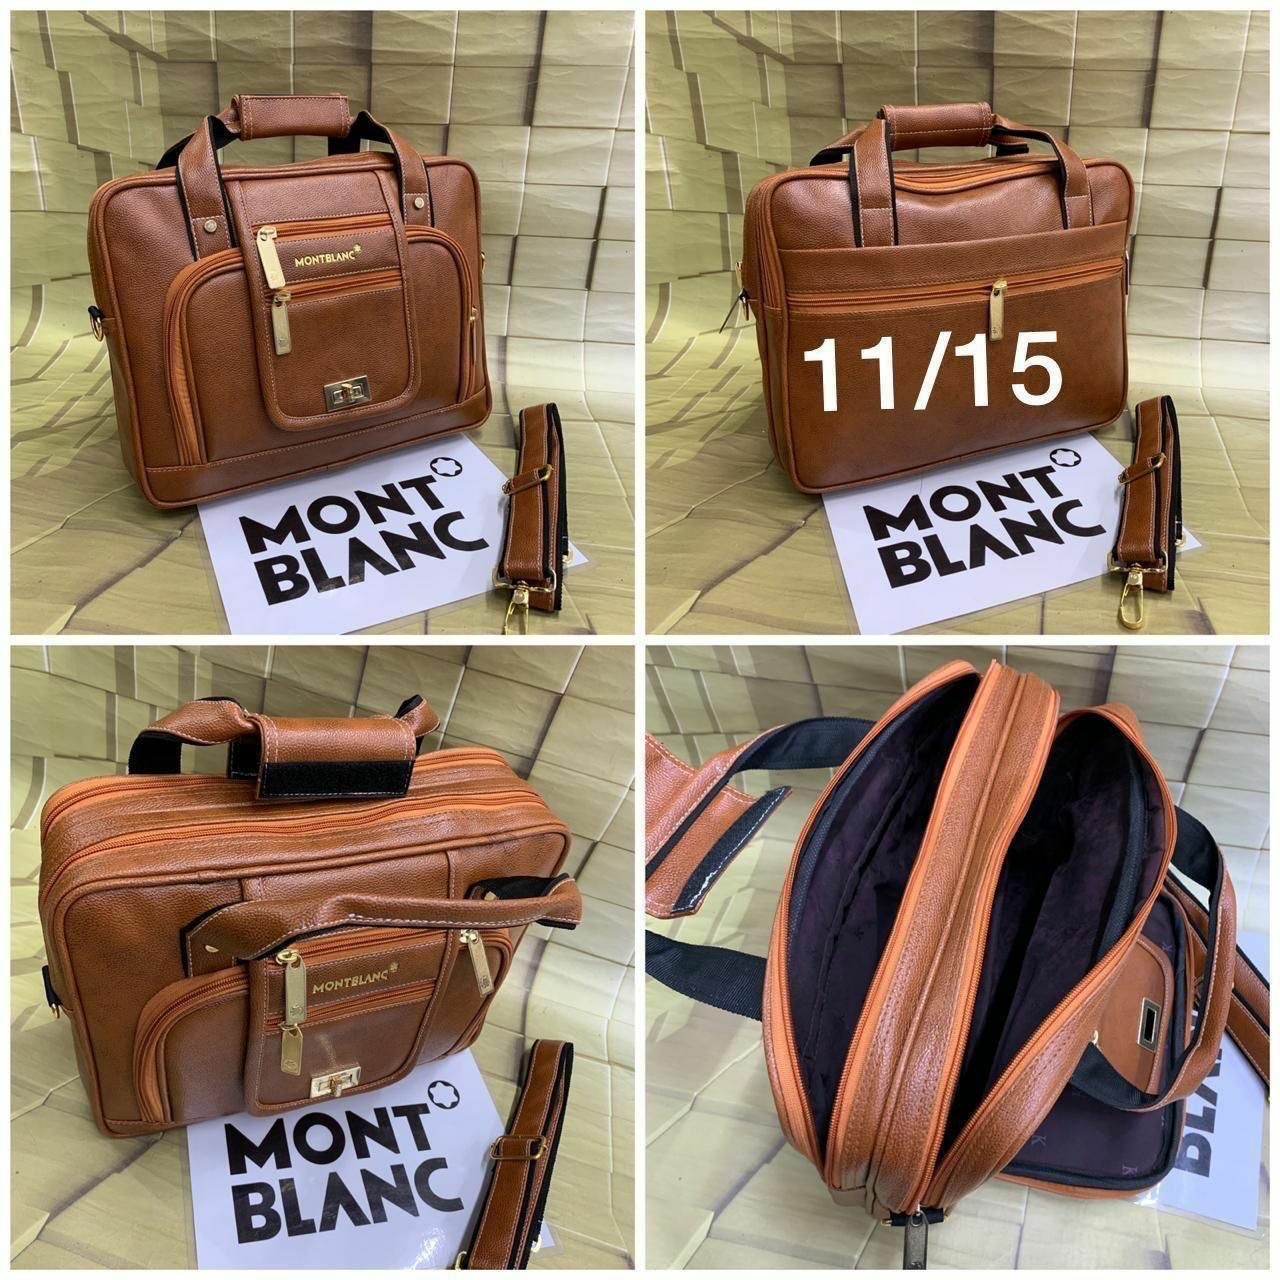 Montblanc NightFlight large backpack with flap